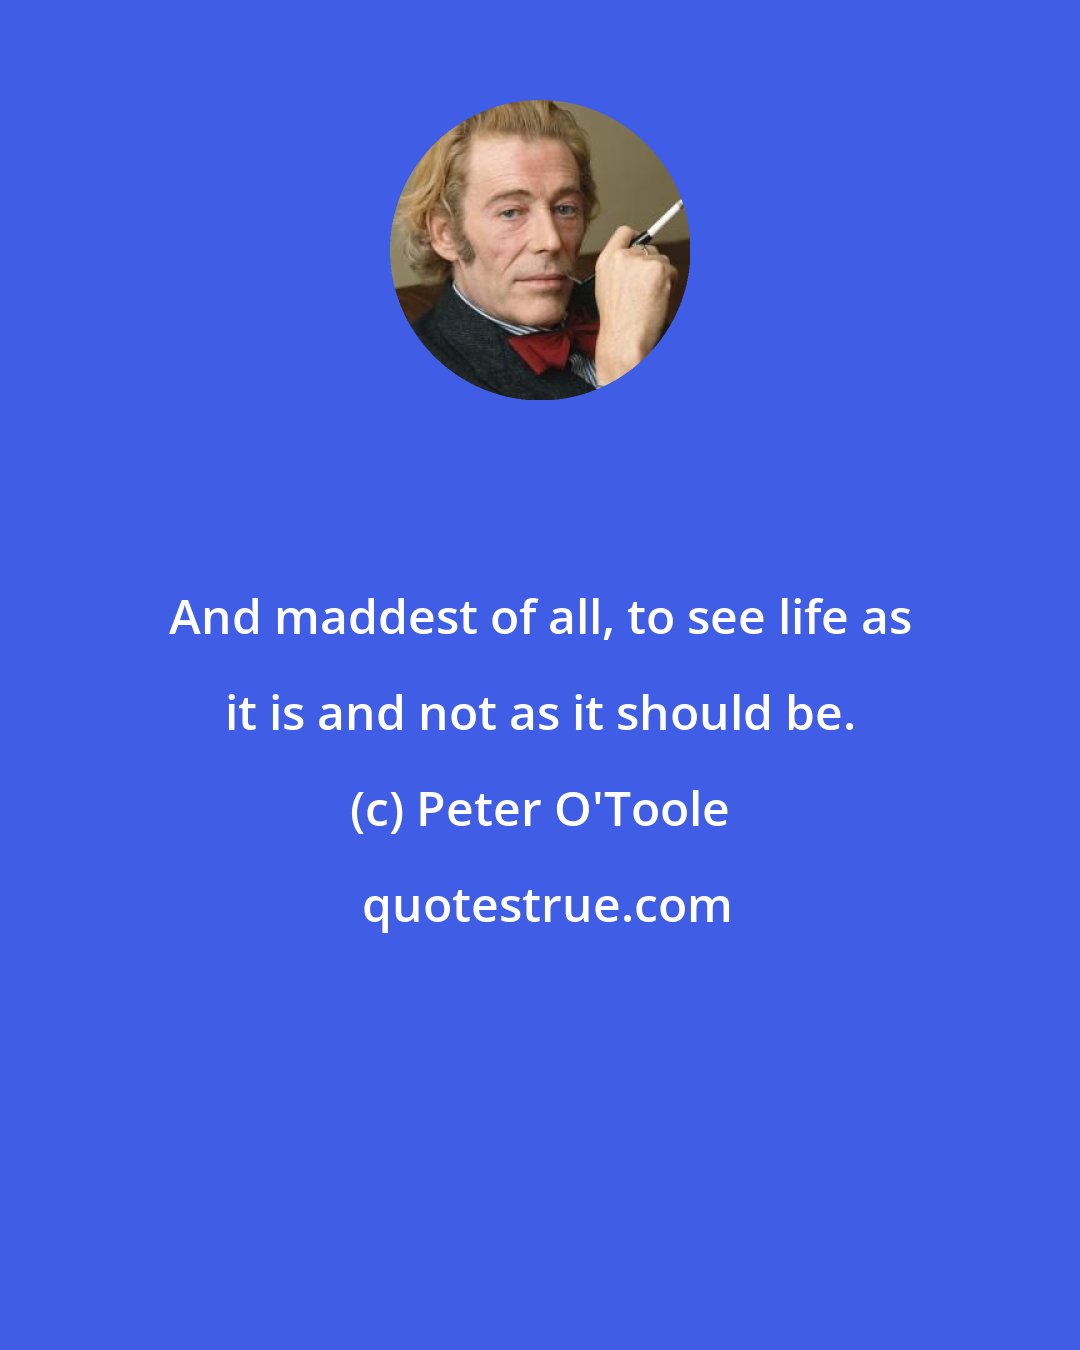 Peter O'Toole: And maddest of all, to see life as it is and not as it should be.